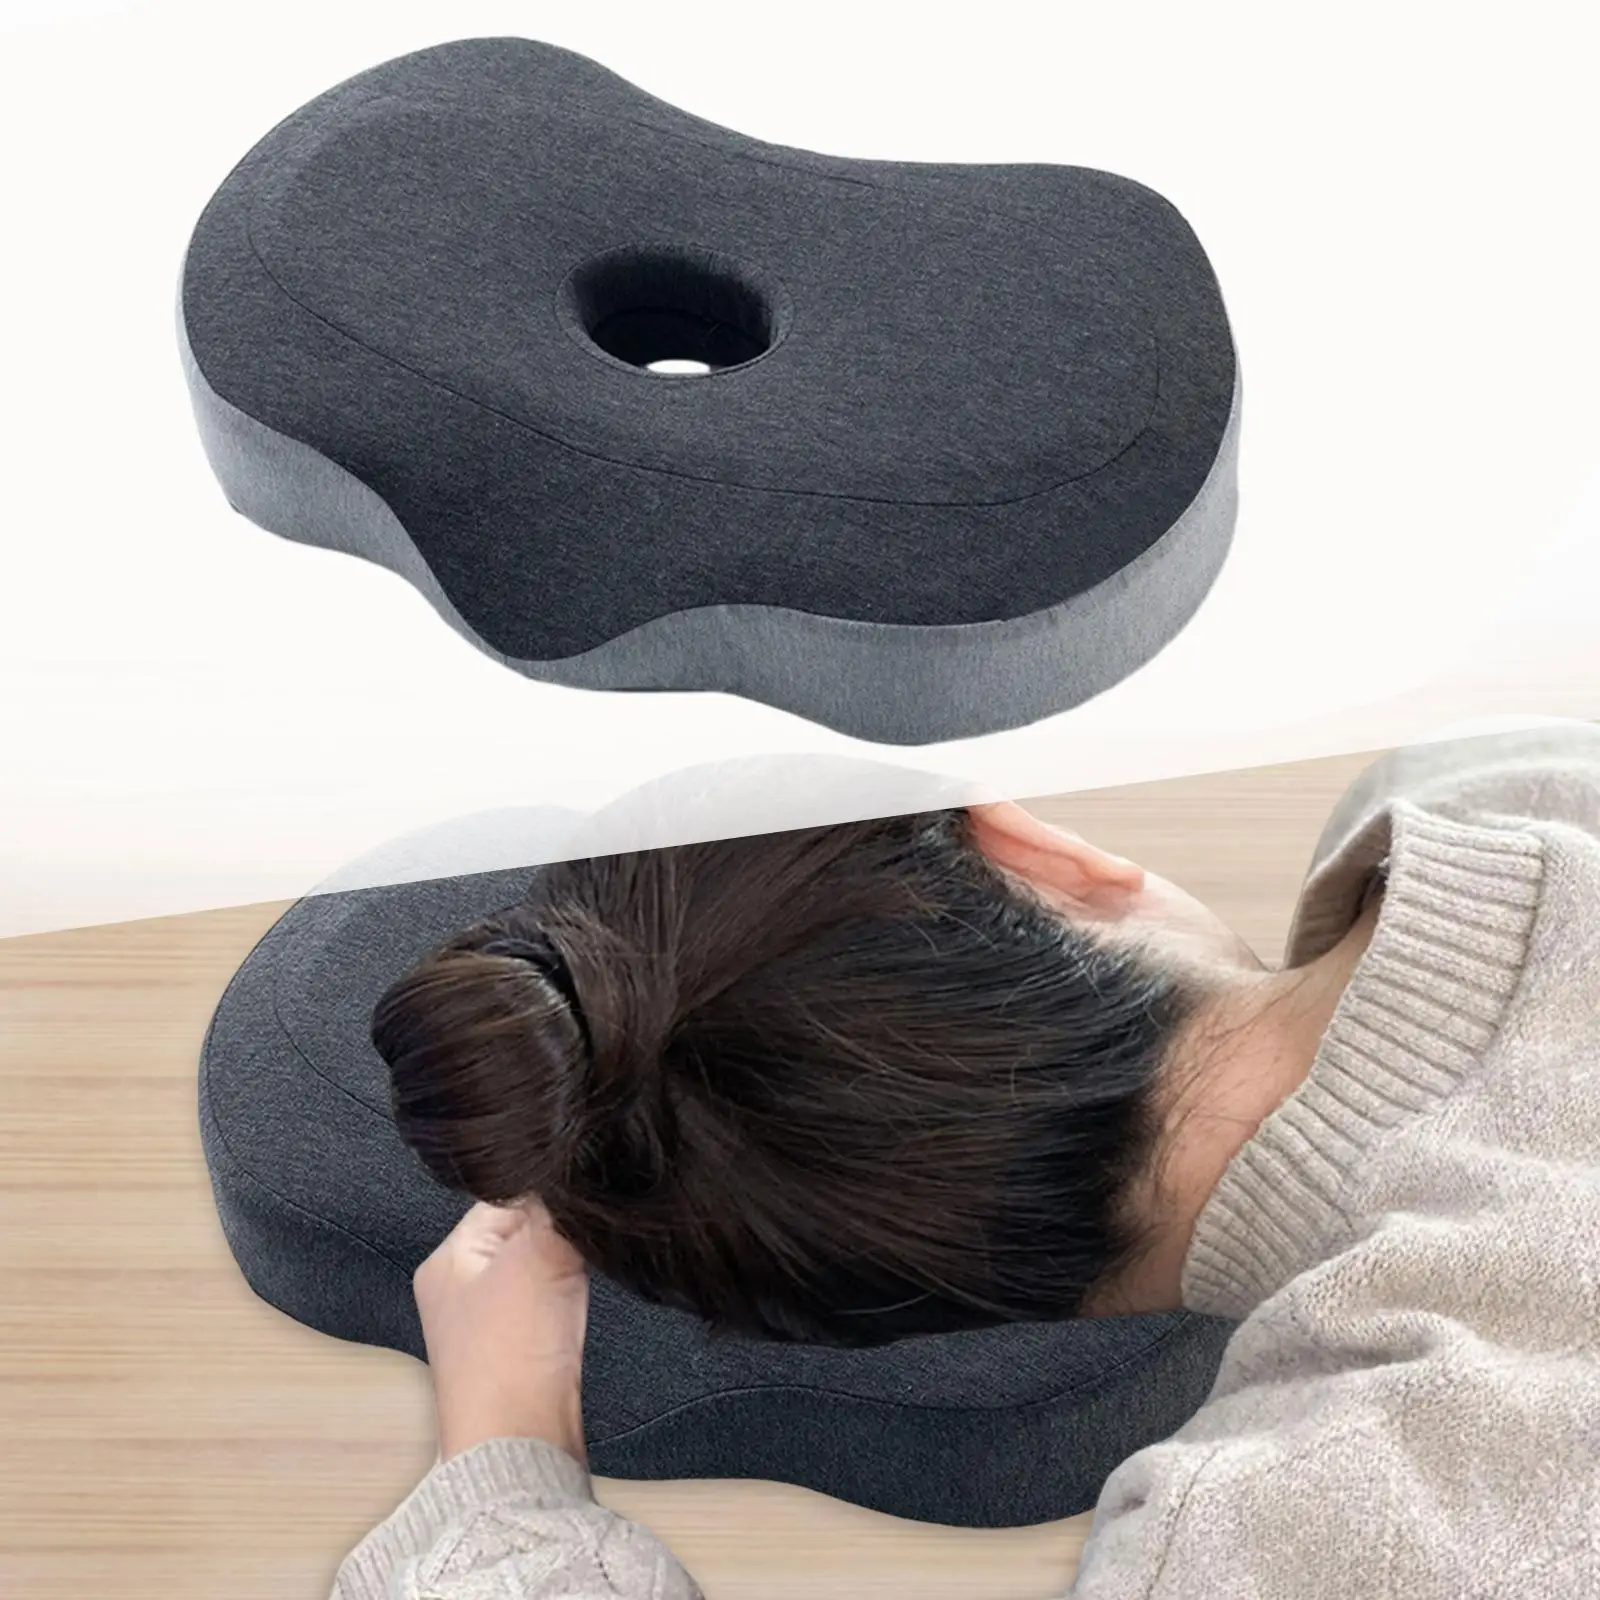 Ear Piercing Pillow Small Pillow with Ear Hole for Side Sleepers Relaxation wearing Headphones Earrings Holiday Gifts